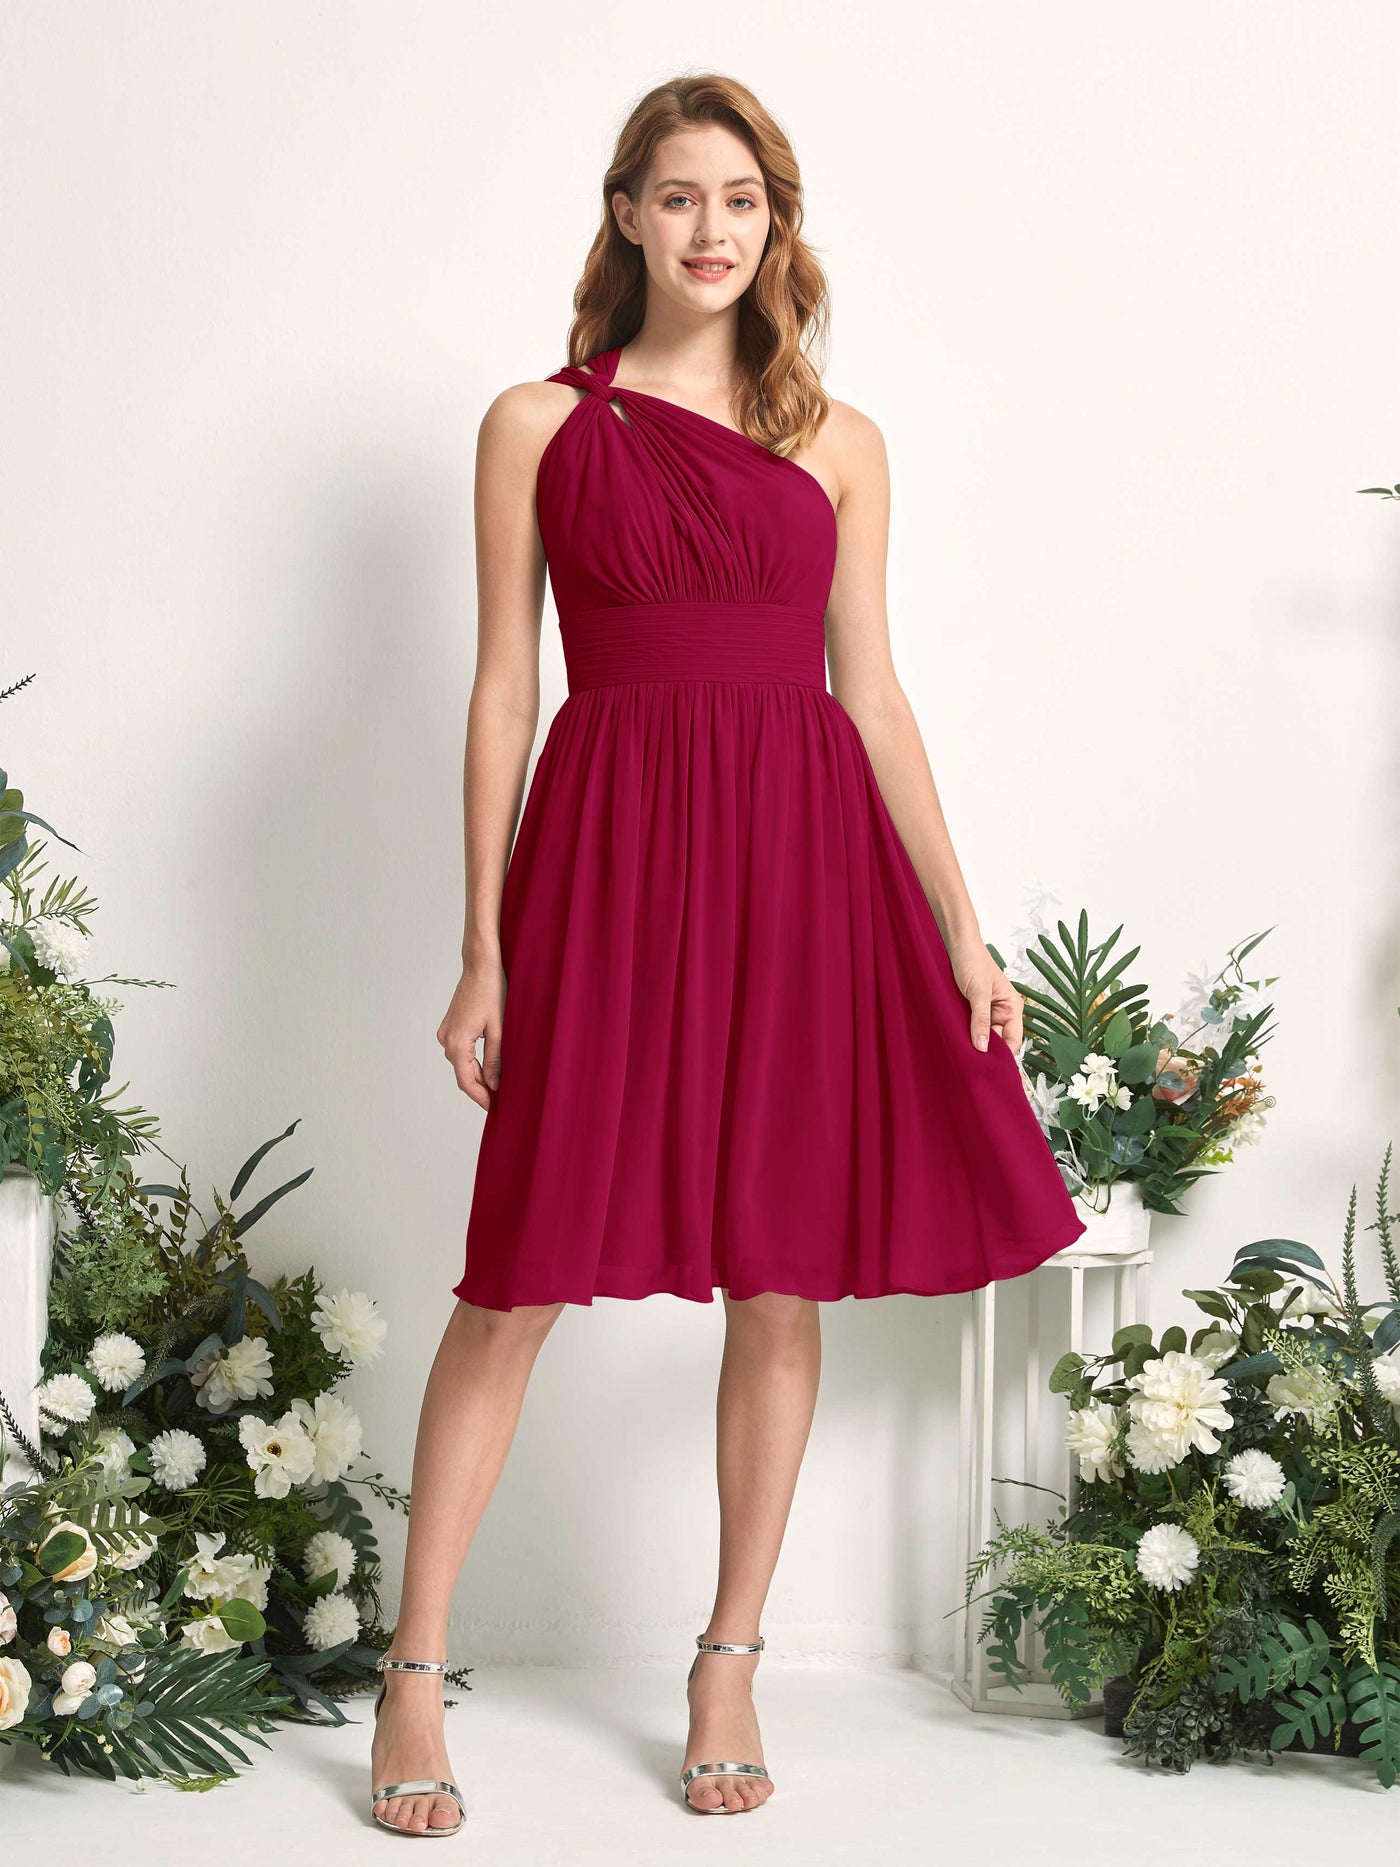 Bridesmaid Dress A-line Chiffon One Shoulder Knee Length Sleeveless Wedding Party Dress - Jester Red (81221241)#color_jester-red